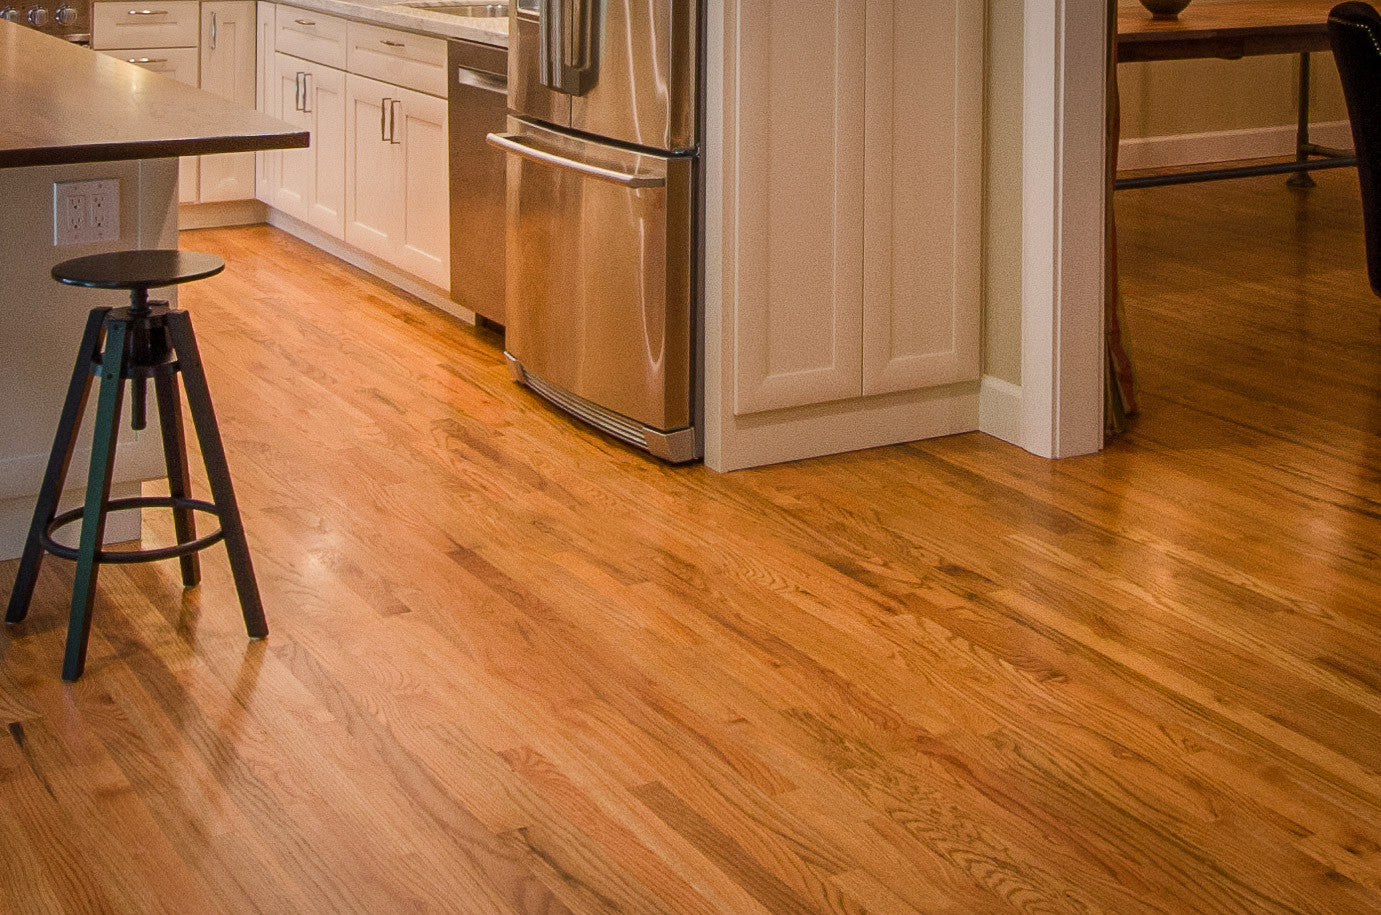 Week 6: Is It Okay To Put A Wood Floor In A Kitchen? (Your Kitchen Remodel Questions Answered)